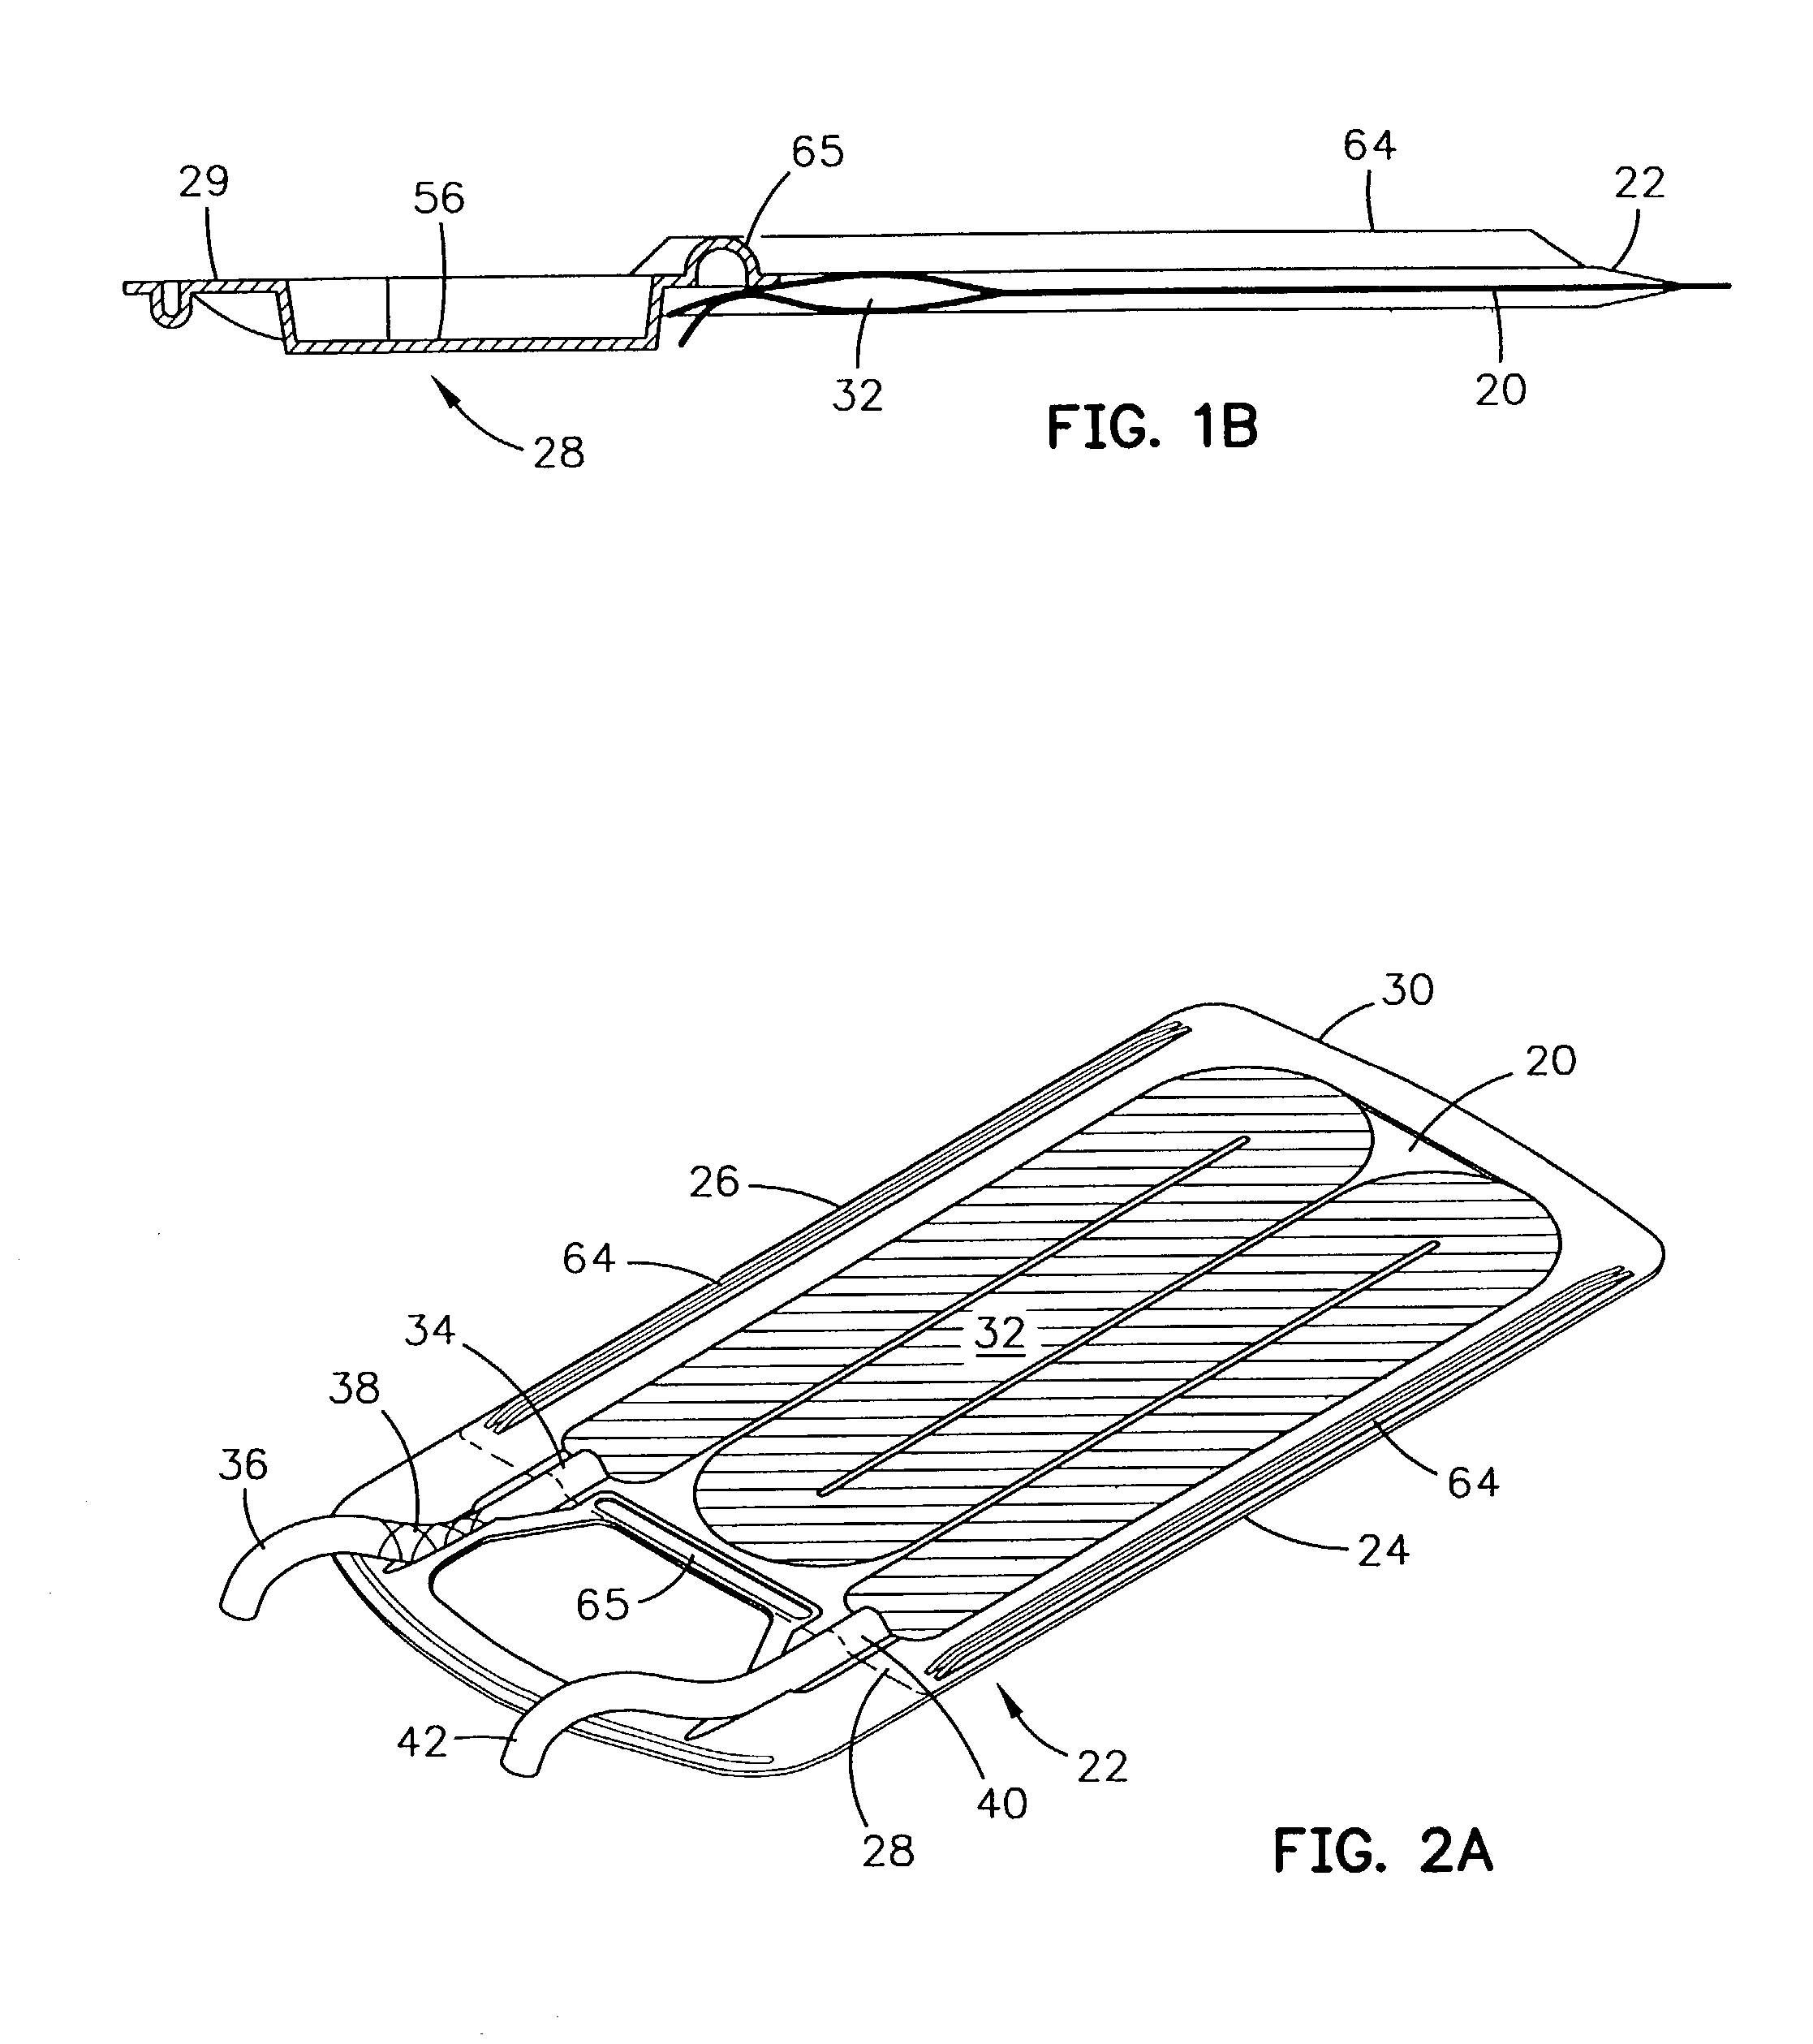 Intravenous fluid warming cassette with stiffening member, fluid container and key mechanism